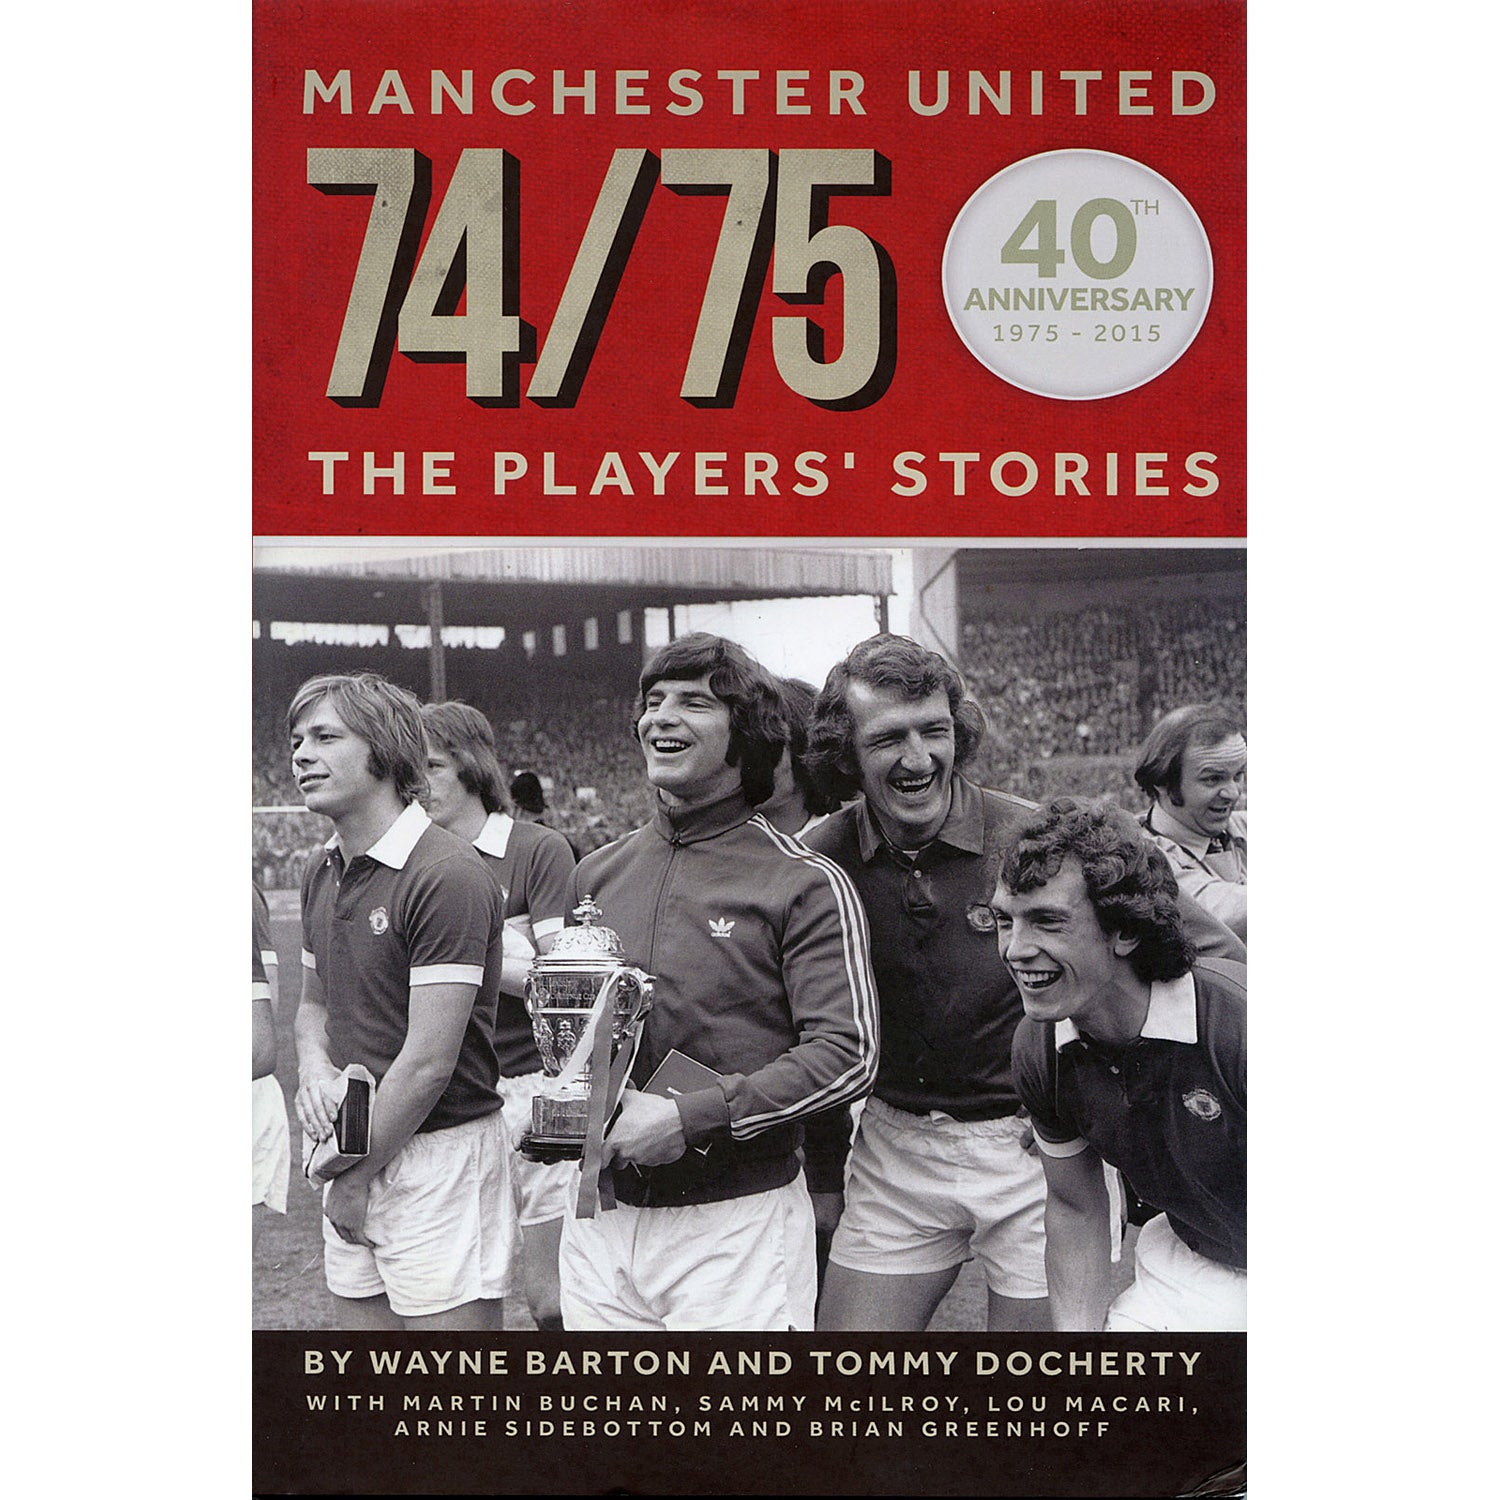 Manchester United 74/75 – The Players' Stories